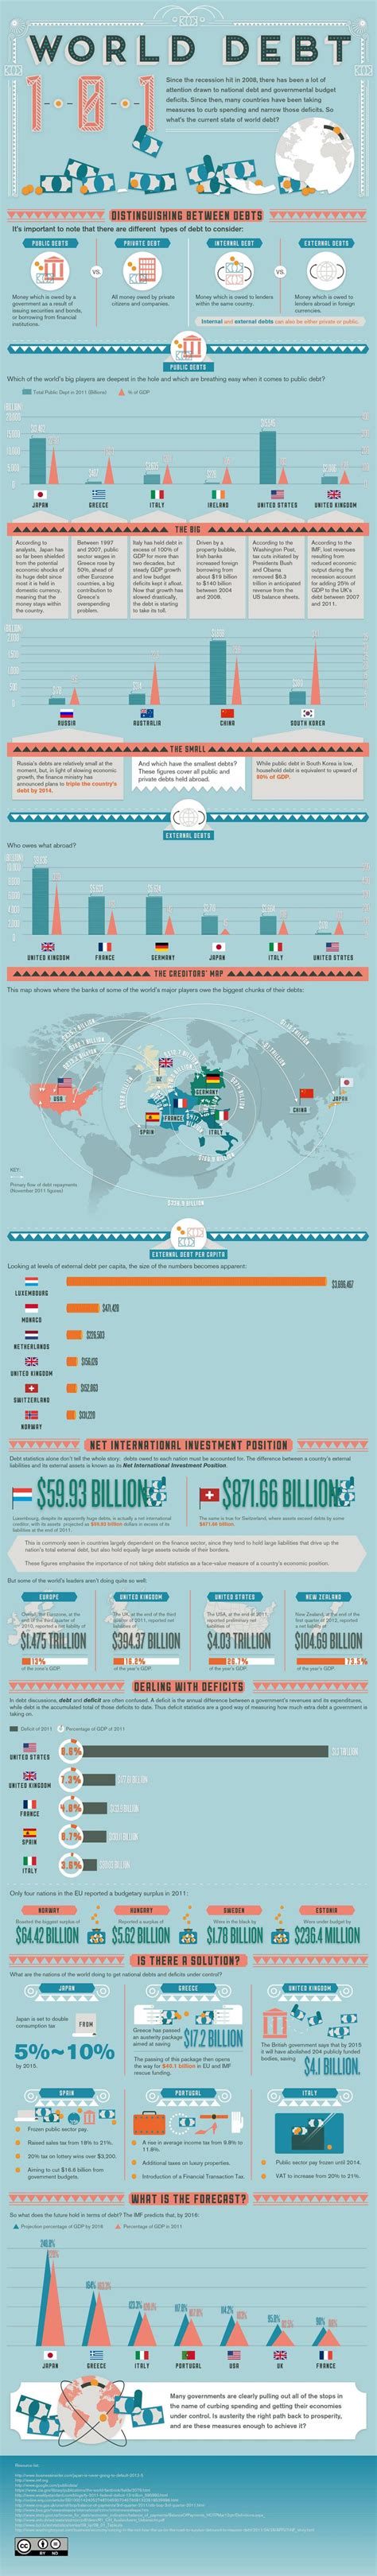 What Is The Current World Debt Infographic